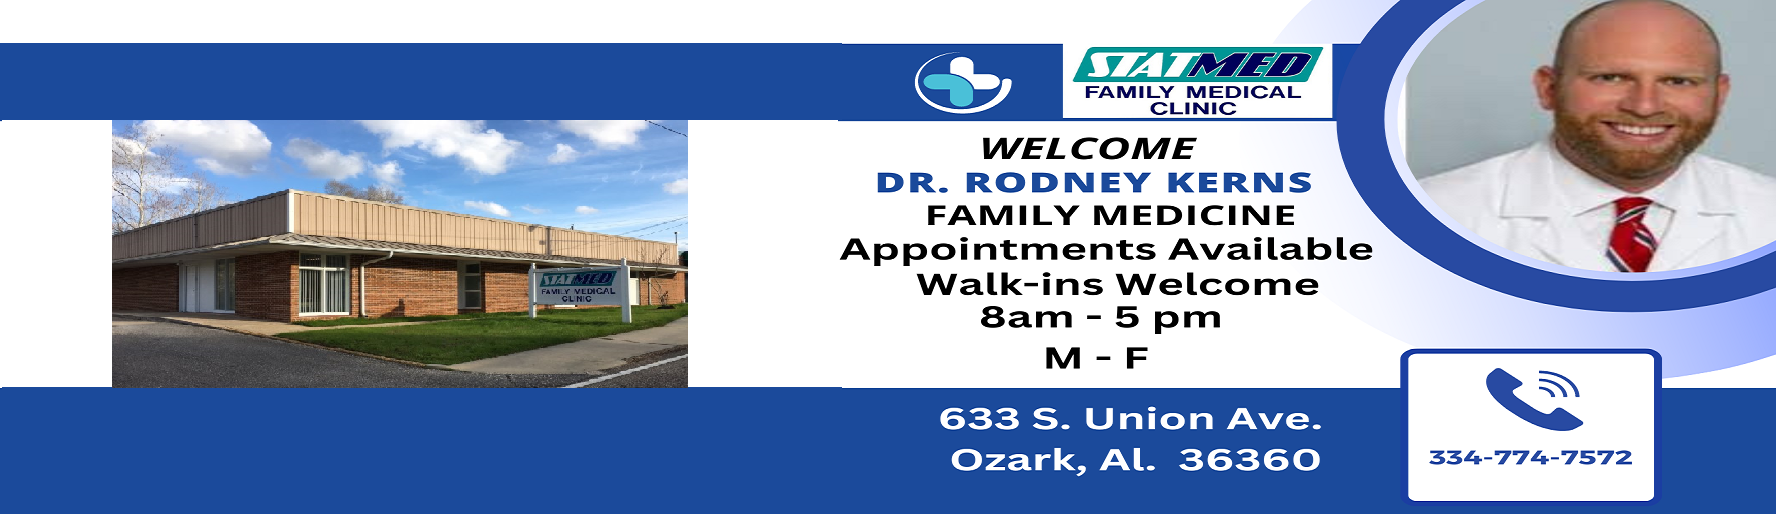 Welcome Dr. Rodney Kerns
Family Medicine
Appointments Available
Walk-ins Welcome
8am-5pm
M-F
STATMED
Family Medical Clinic

633 S. Union Ave.
Ozark, Al. 36360

334-774-7572